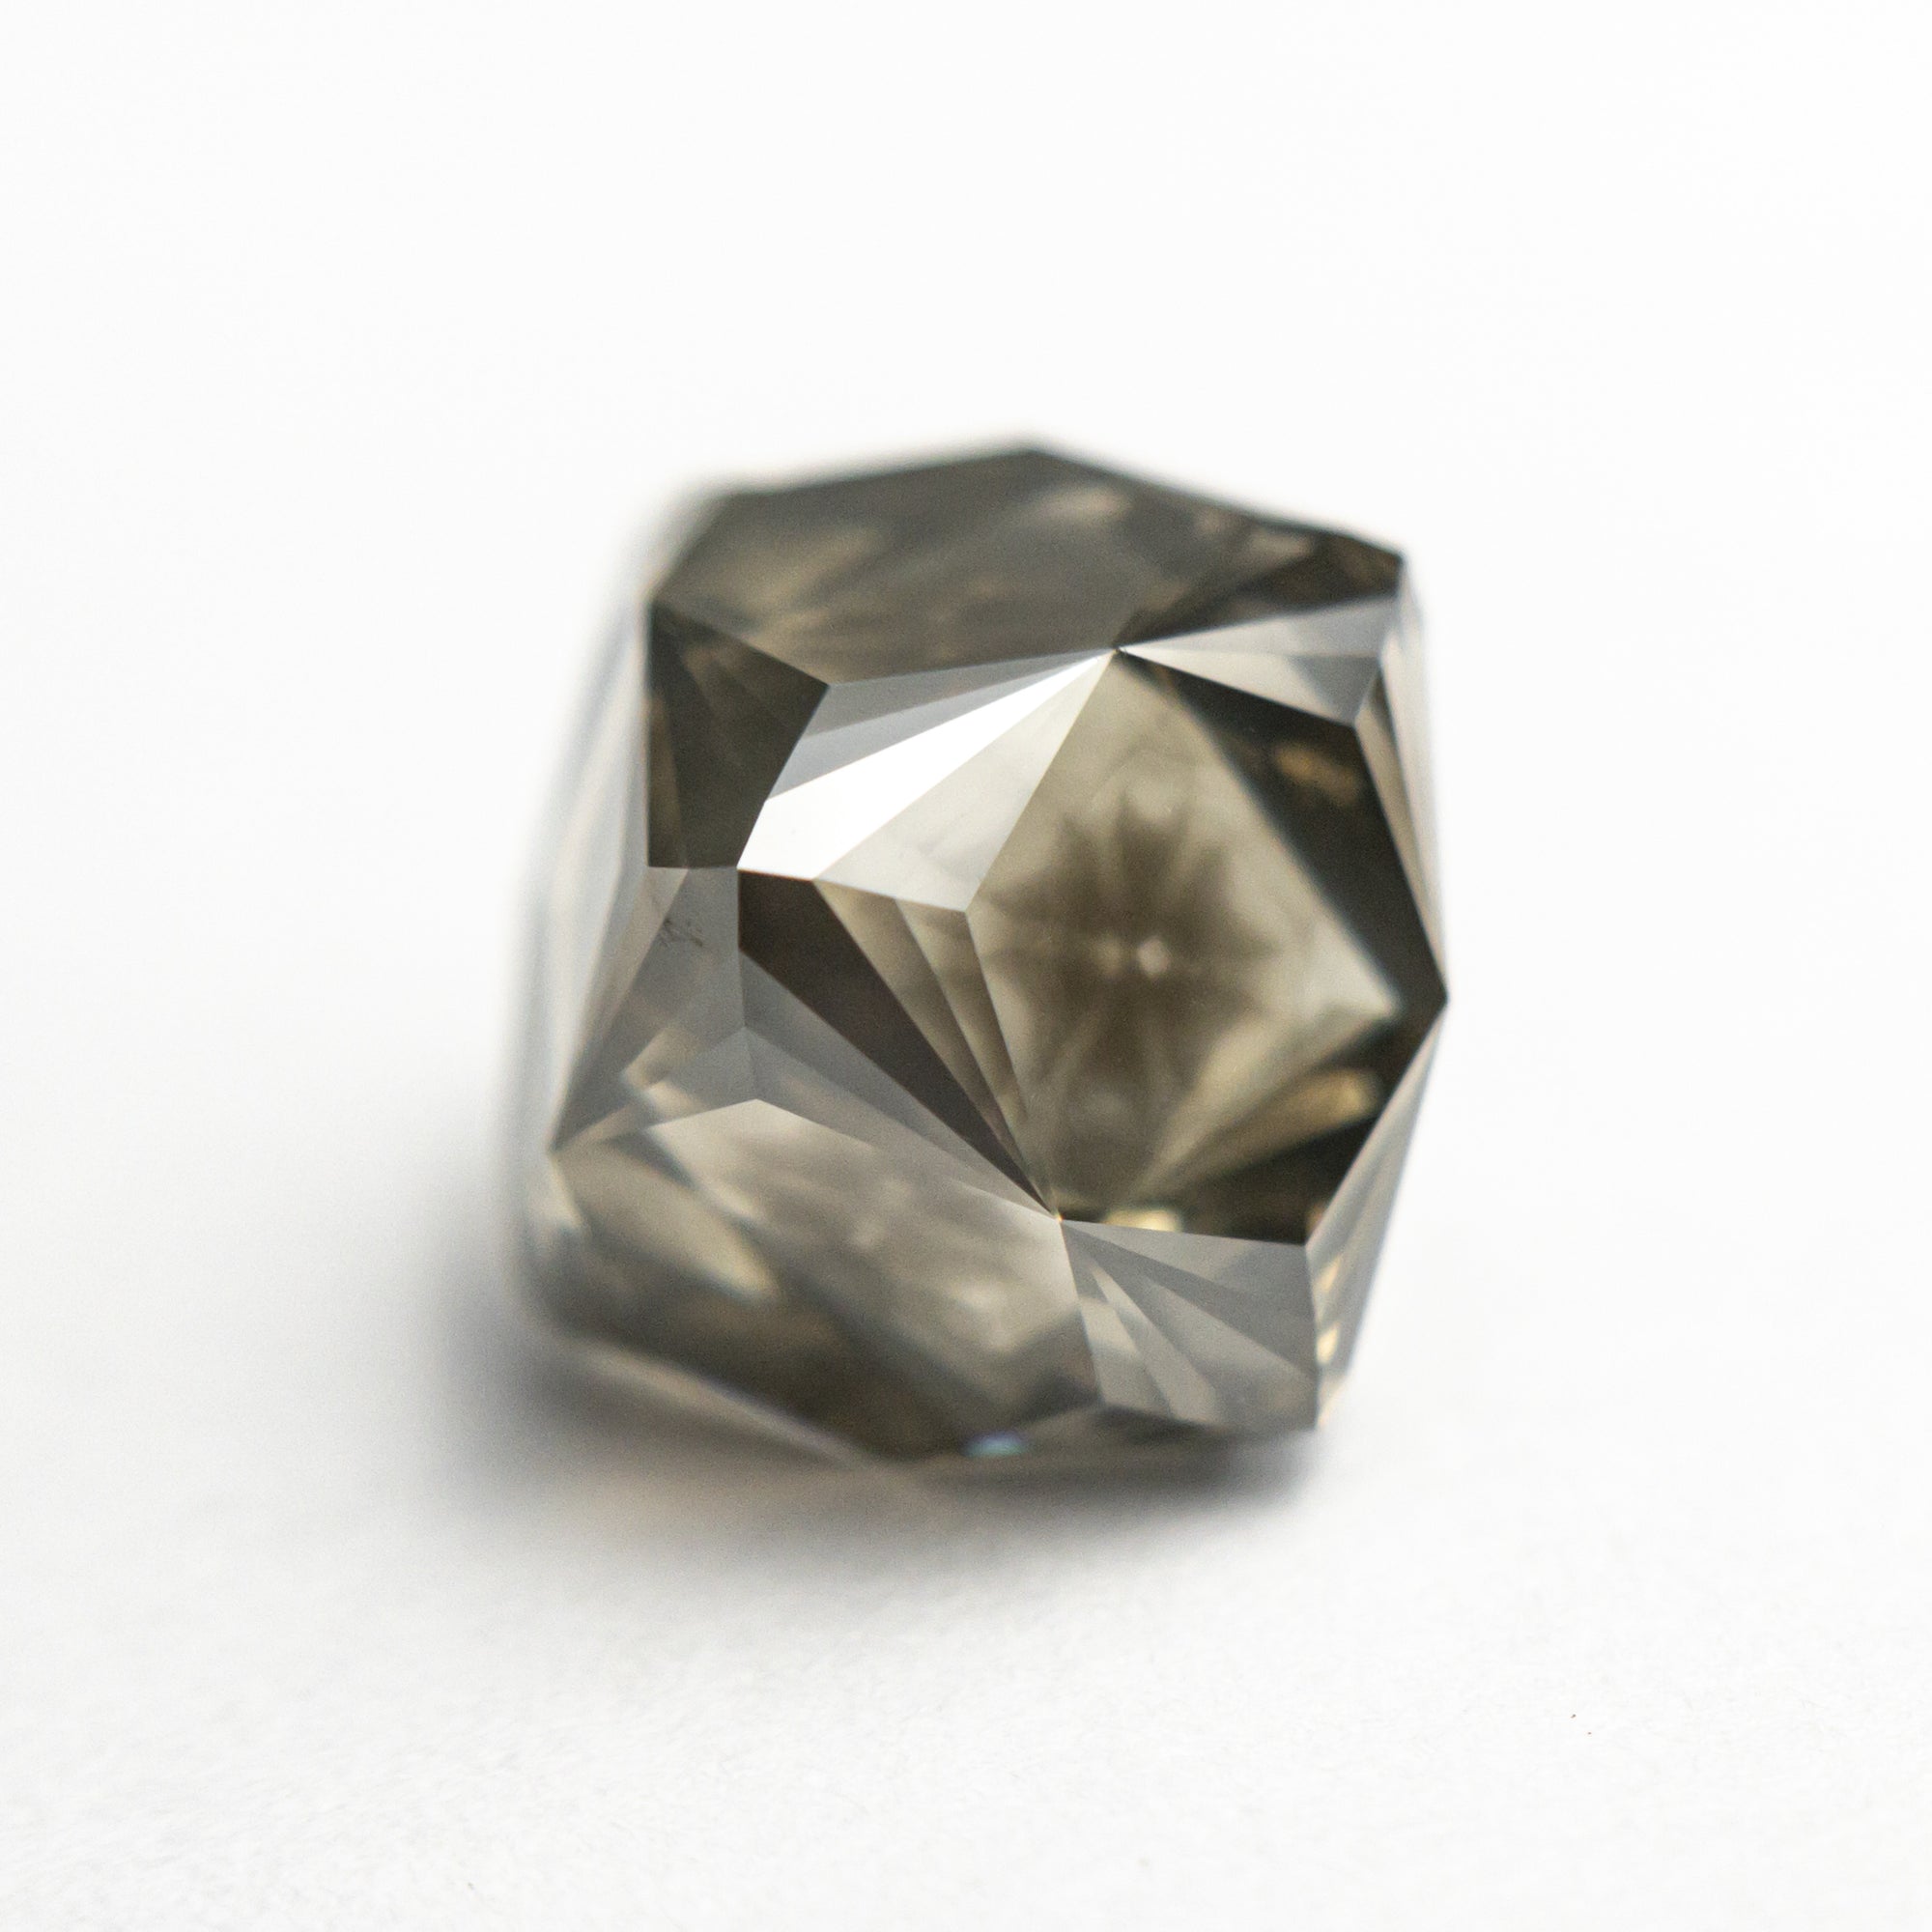 6.67ct 10.99x10.89x9.70mm Asteriated Octahedron 24522-01